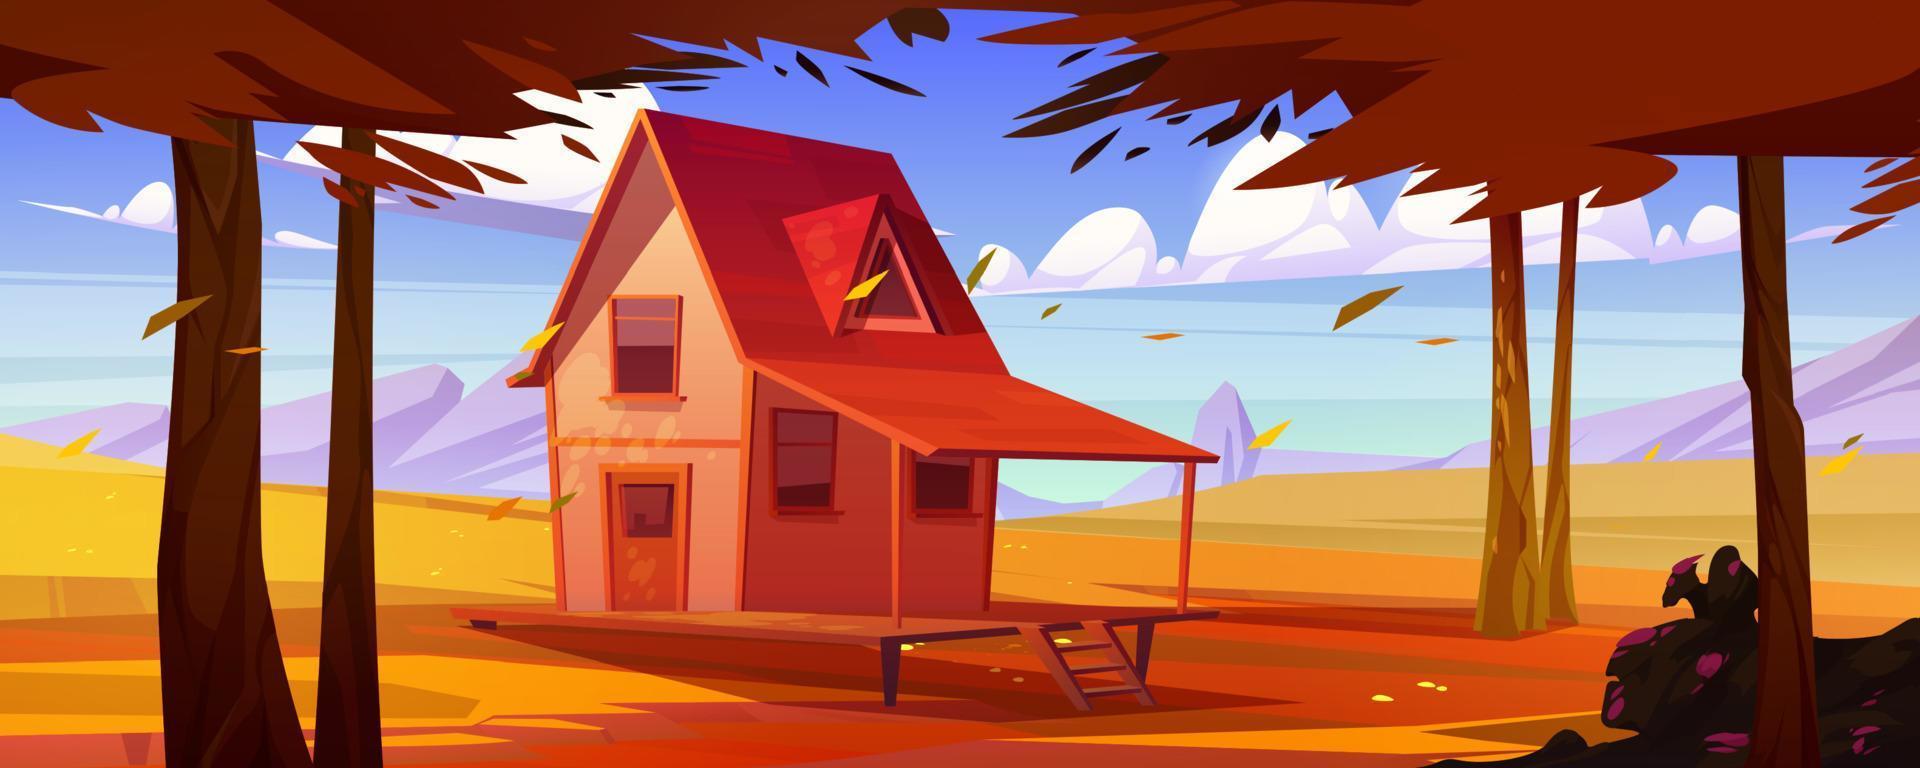 Autumn countryside landscape with rural house vector